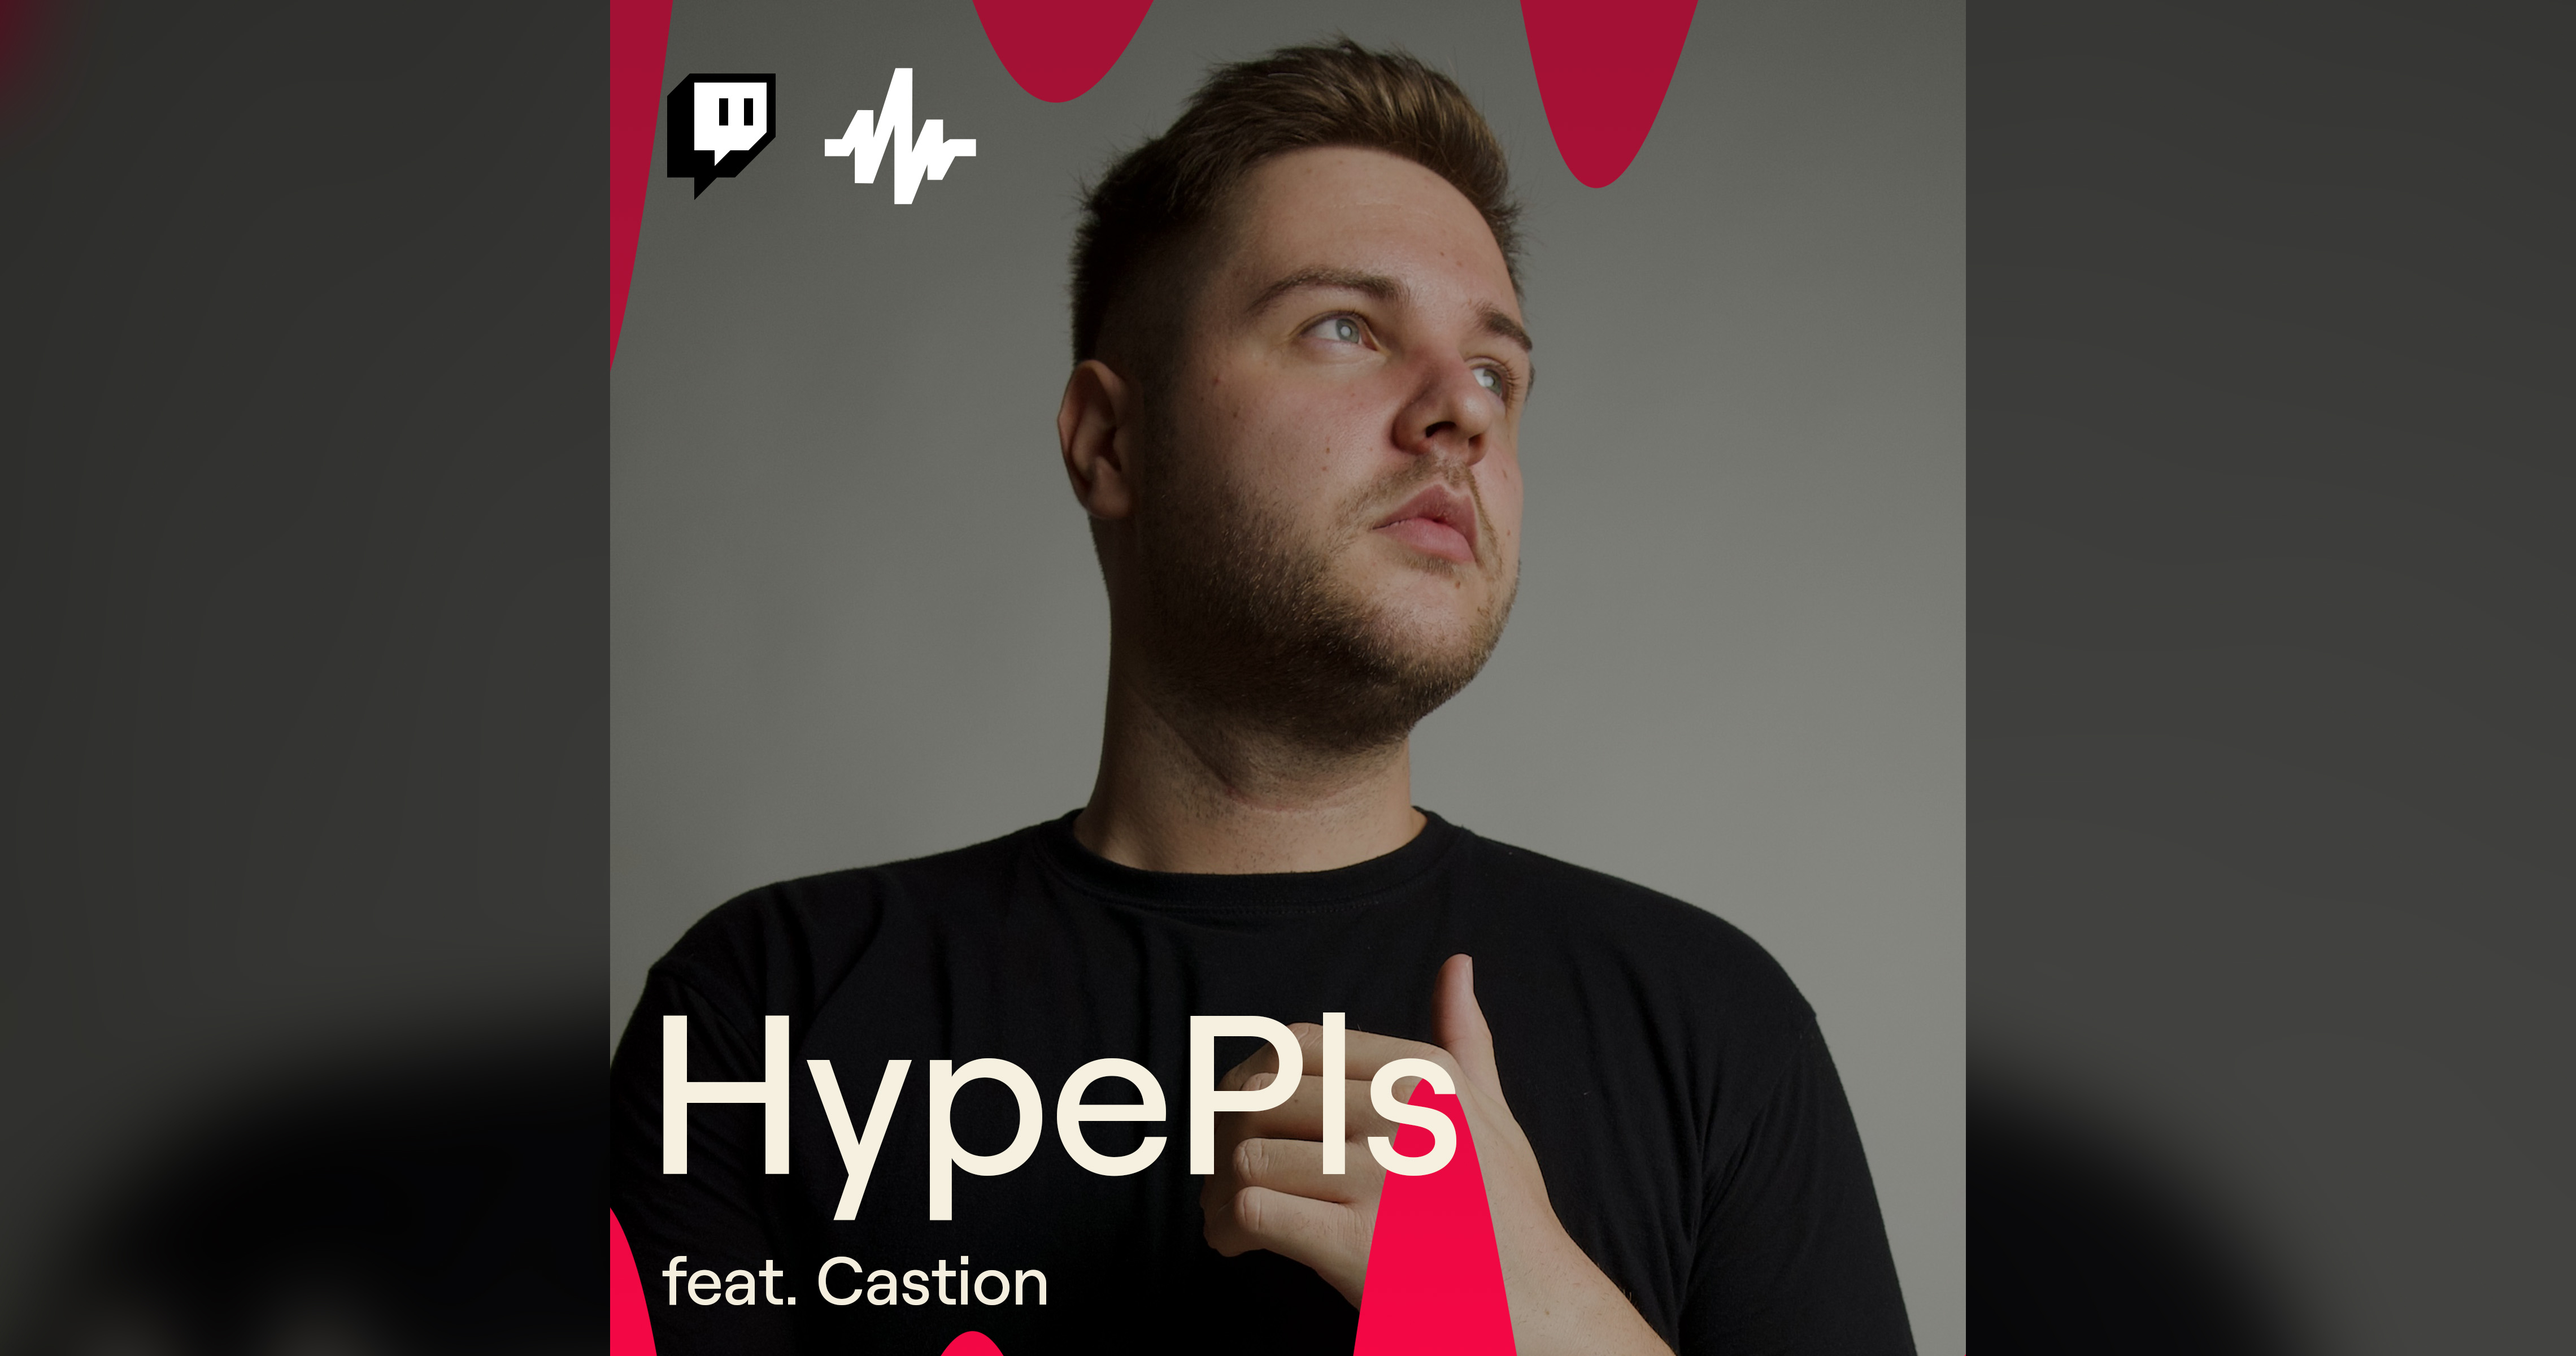 Castion lands the cover of Twitch’s HypePls playlist